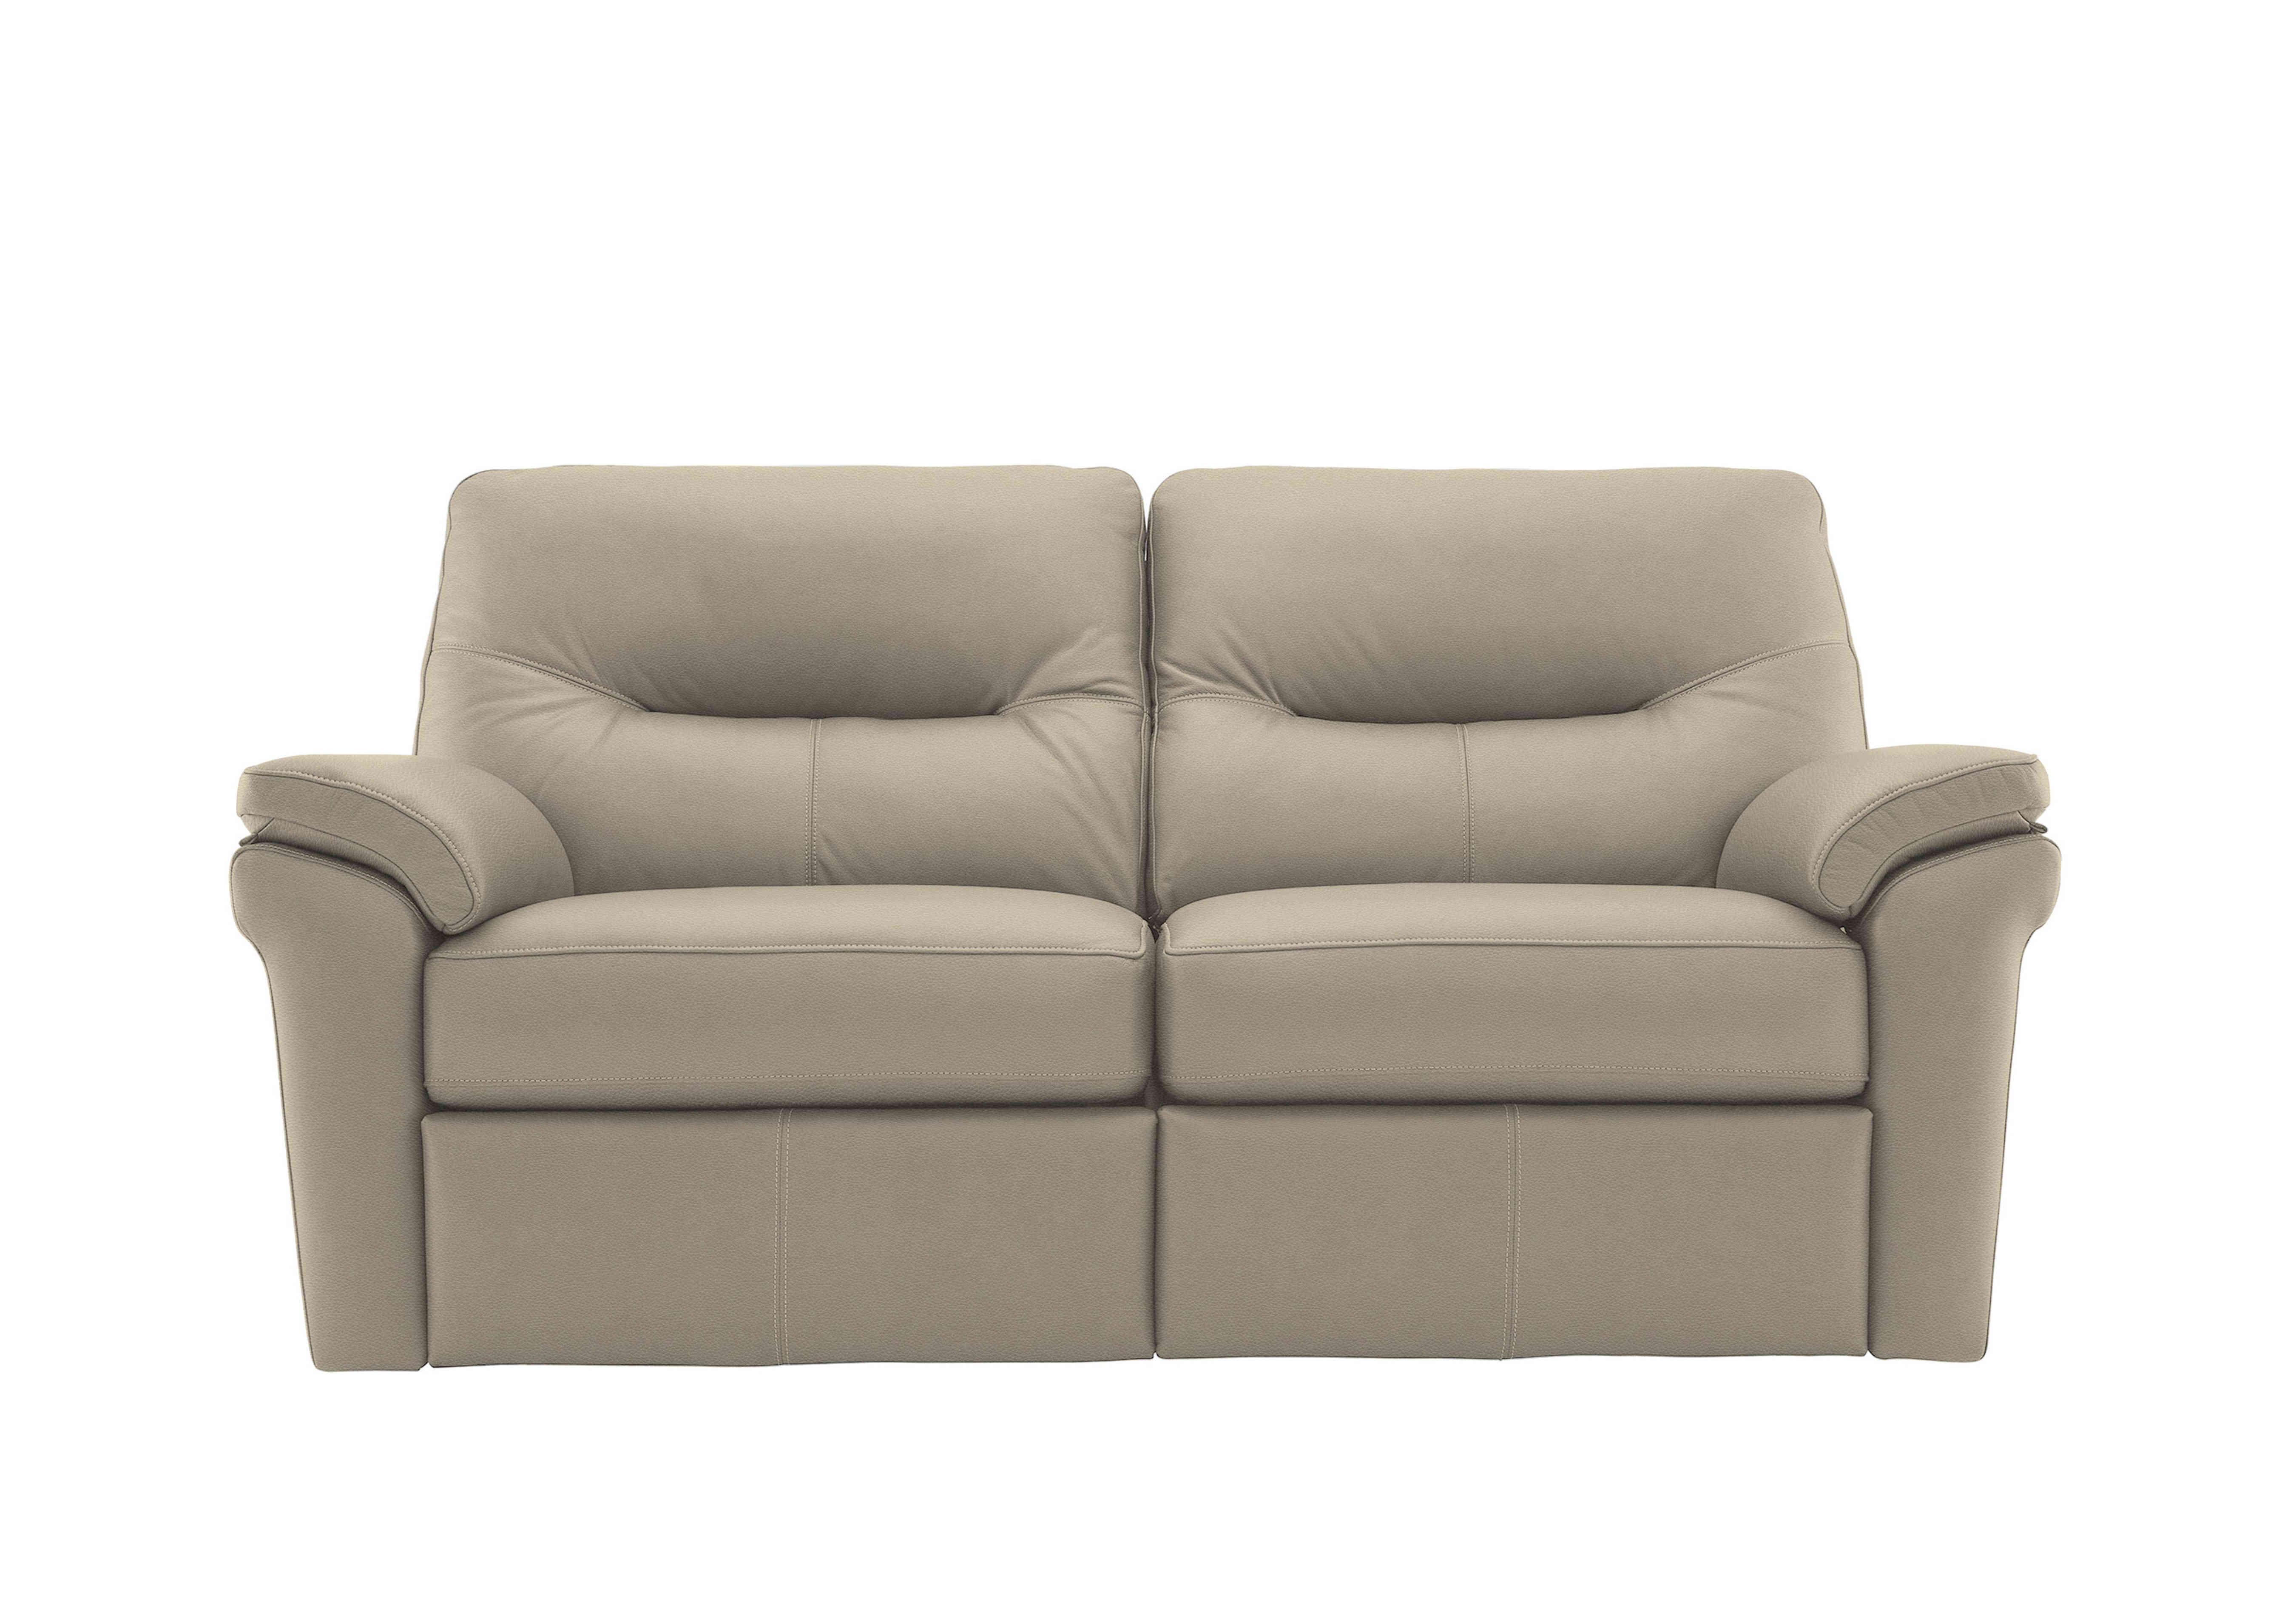 Seattle 2.5 Seater Leather Sofa in H001 Oxford Mushroom on Furniture Village